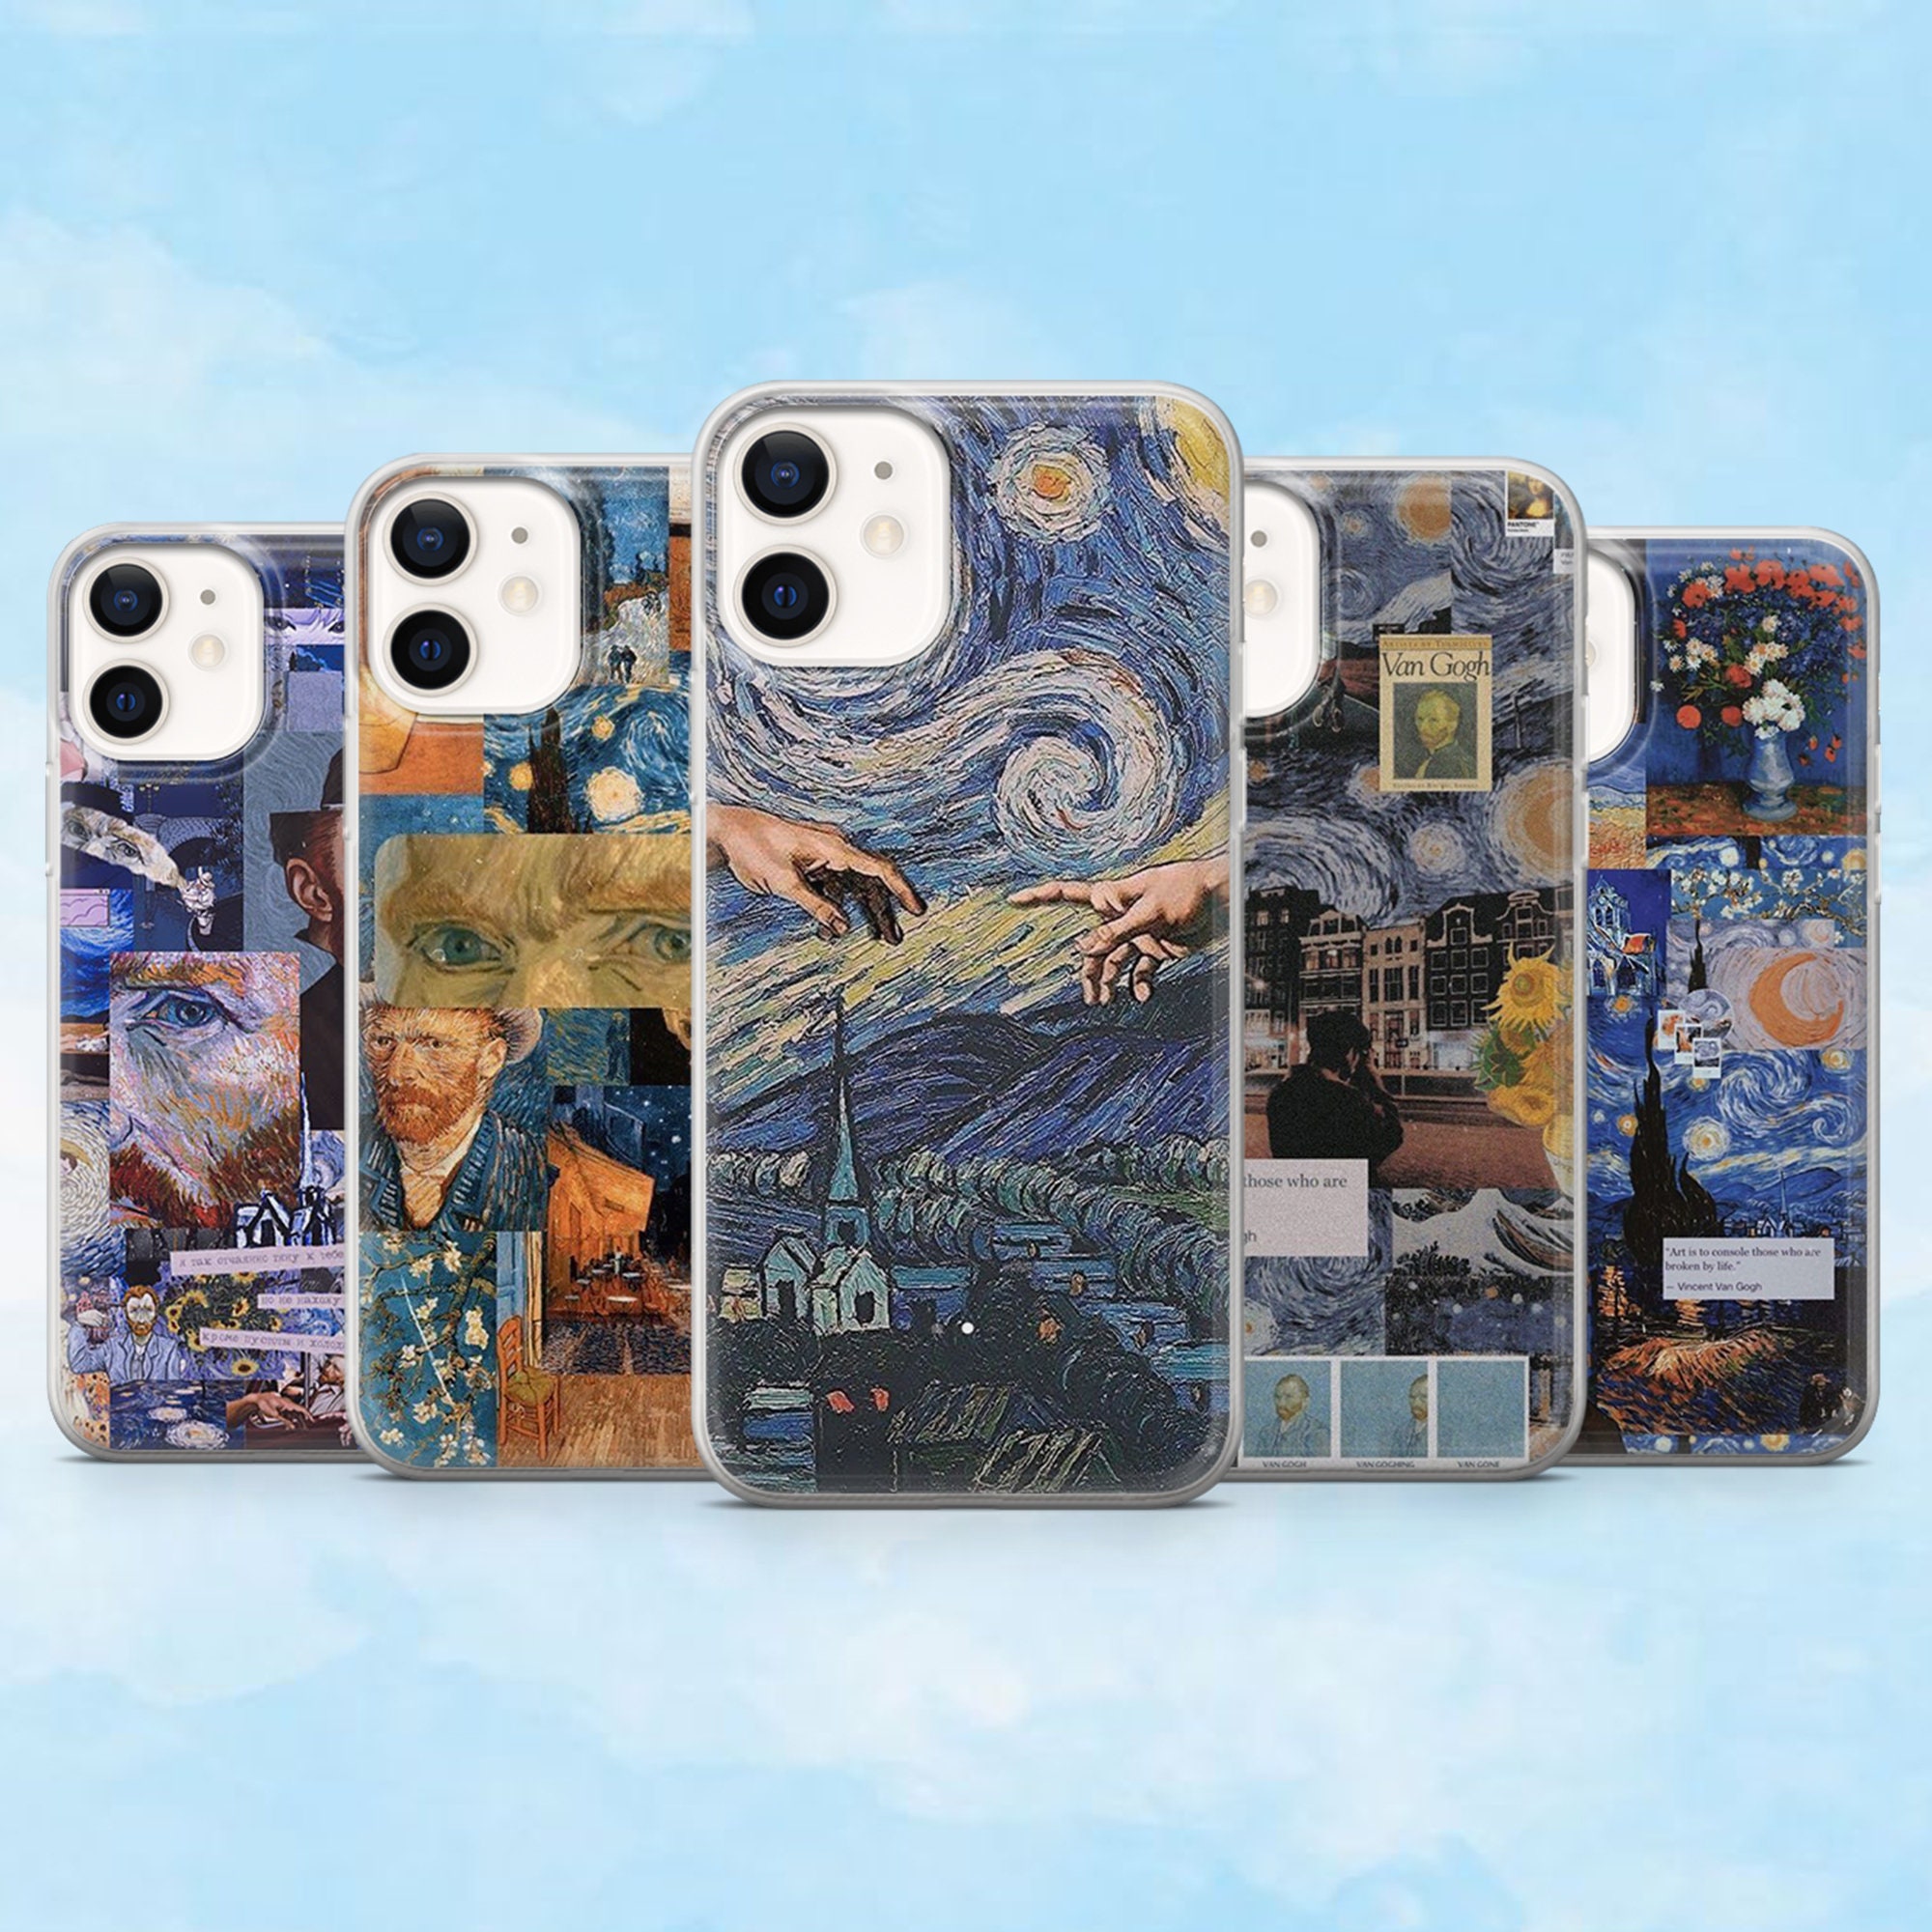 Vincent Van Gogh Phone Case Collage Cover for iPhone 13, 12 Pro, Xs, Xr, 11